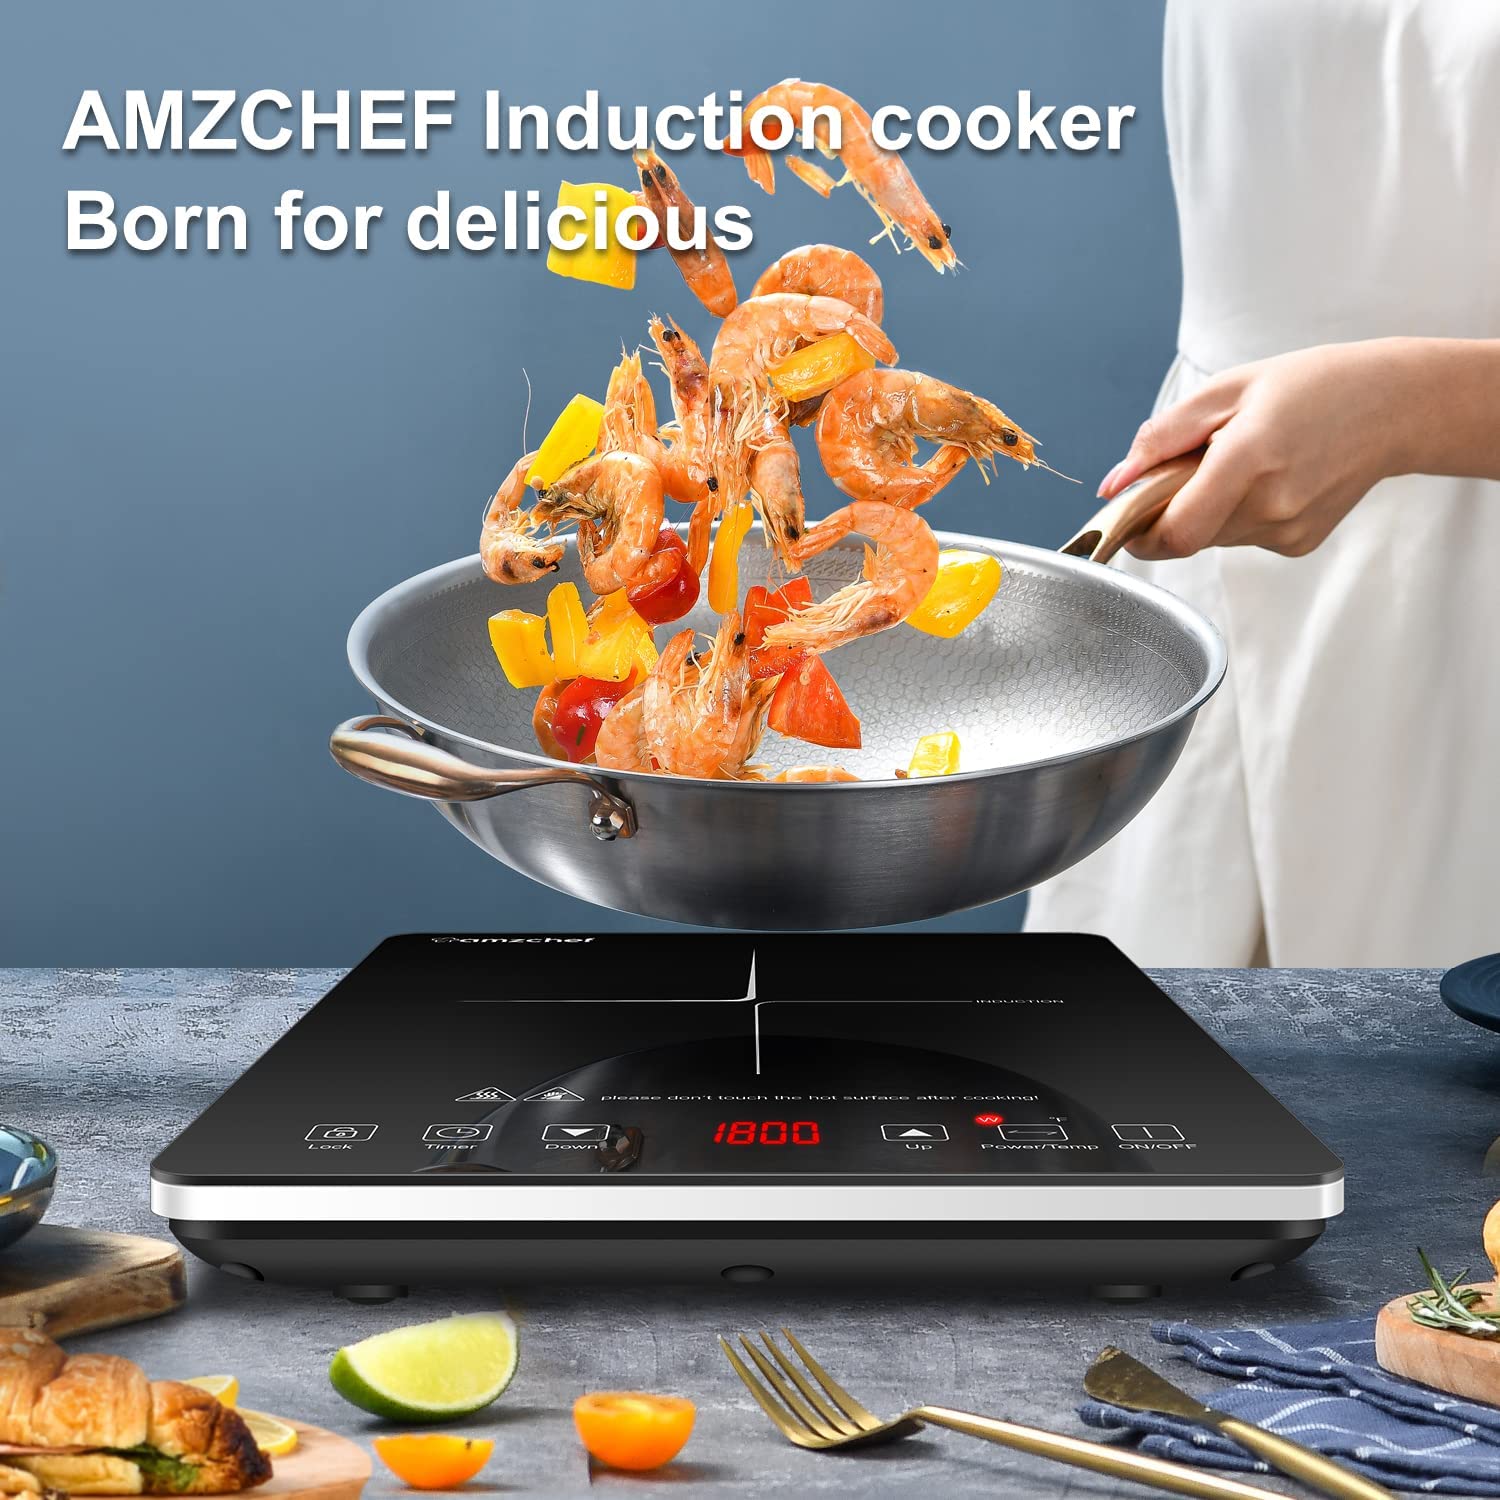 7 Portable Induction Cooktops with Stainless Steel Pot or Frying